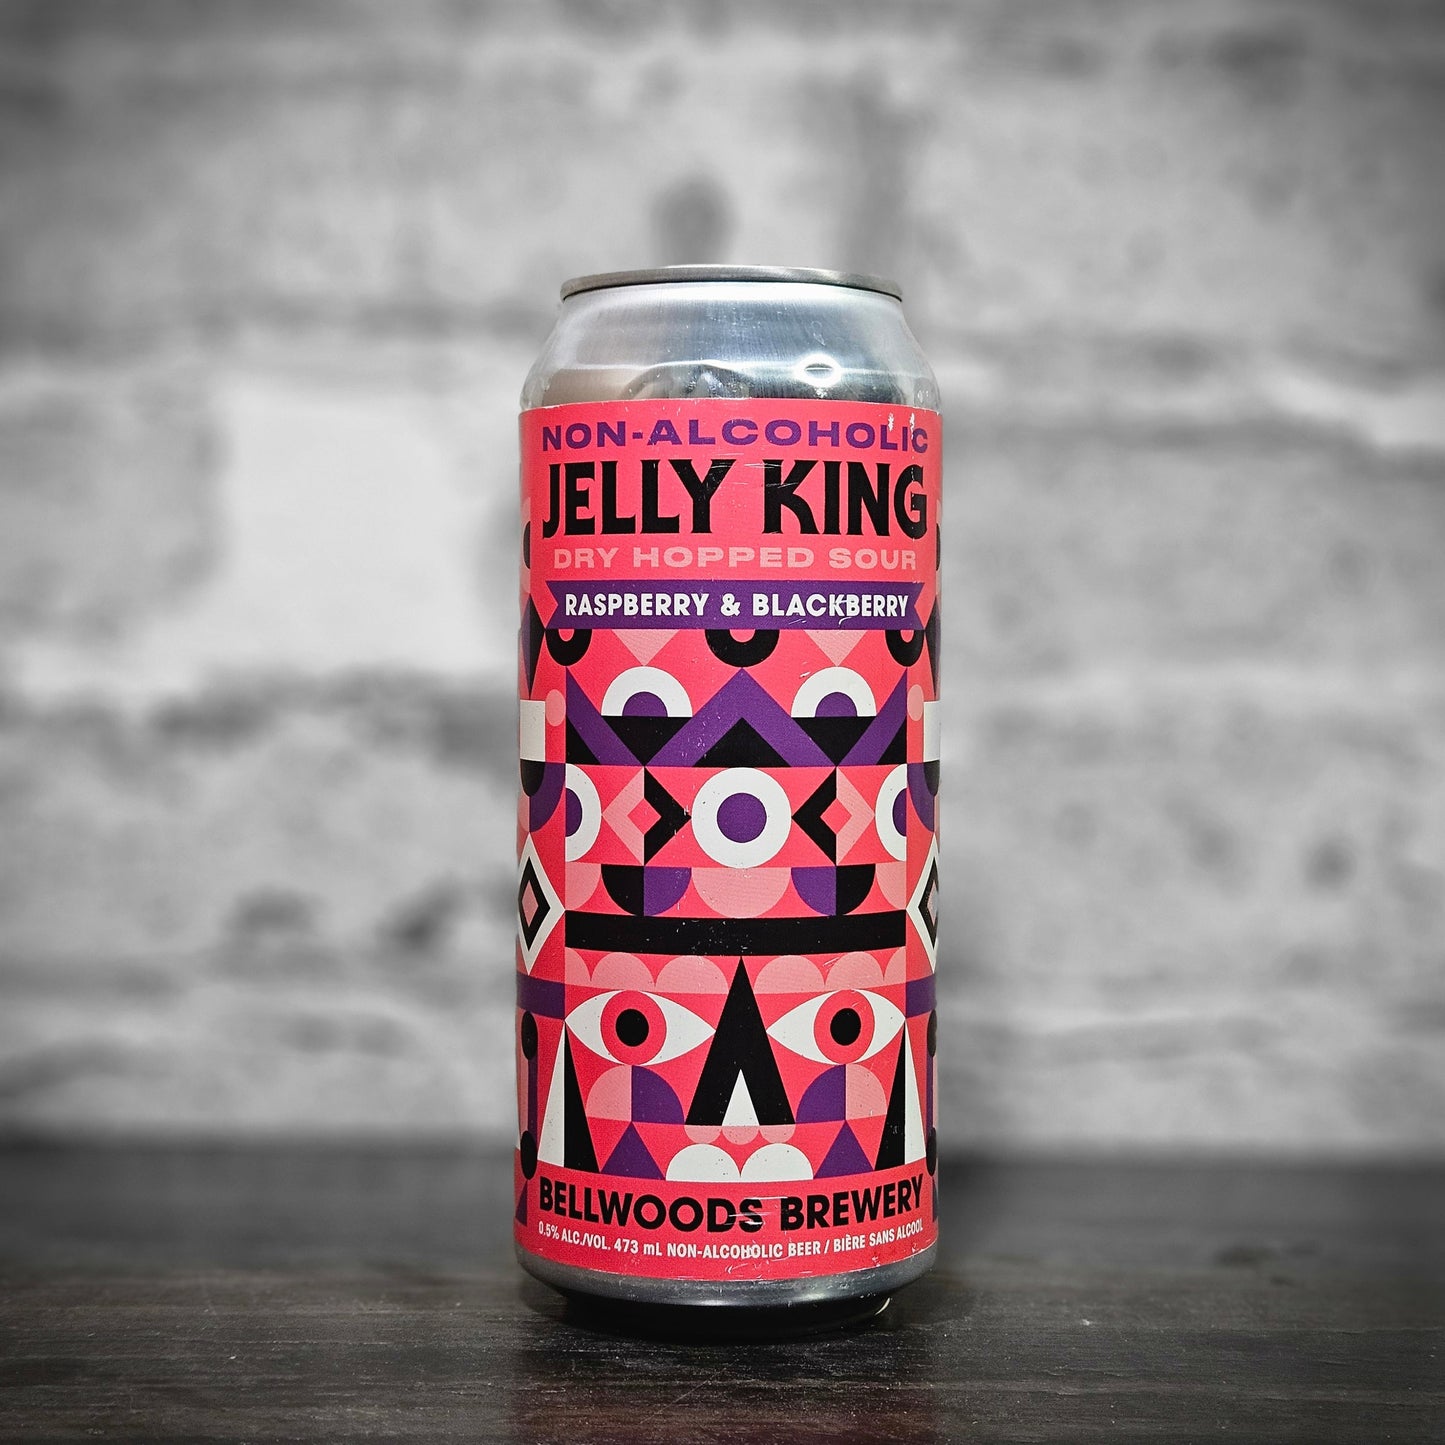 Bellwoods "Jelly King" Non-Alcoholic Blueberry / Raspberry Sour